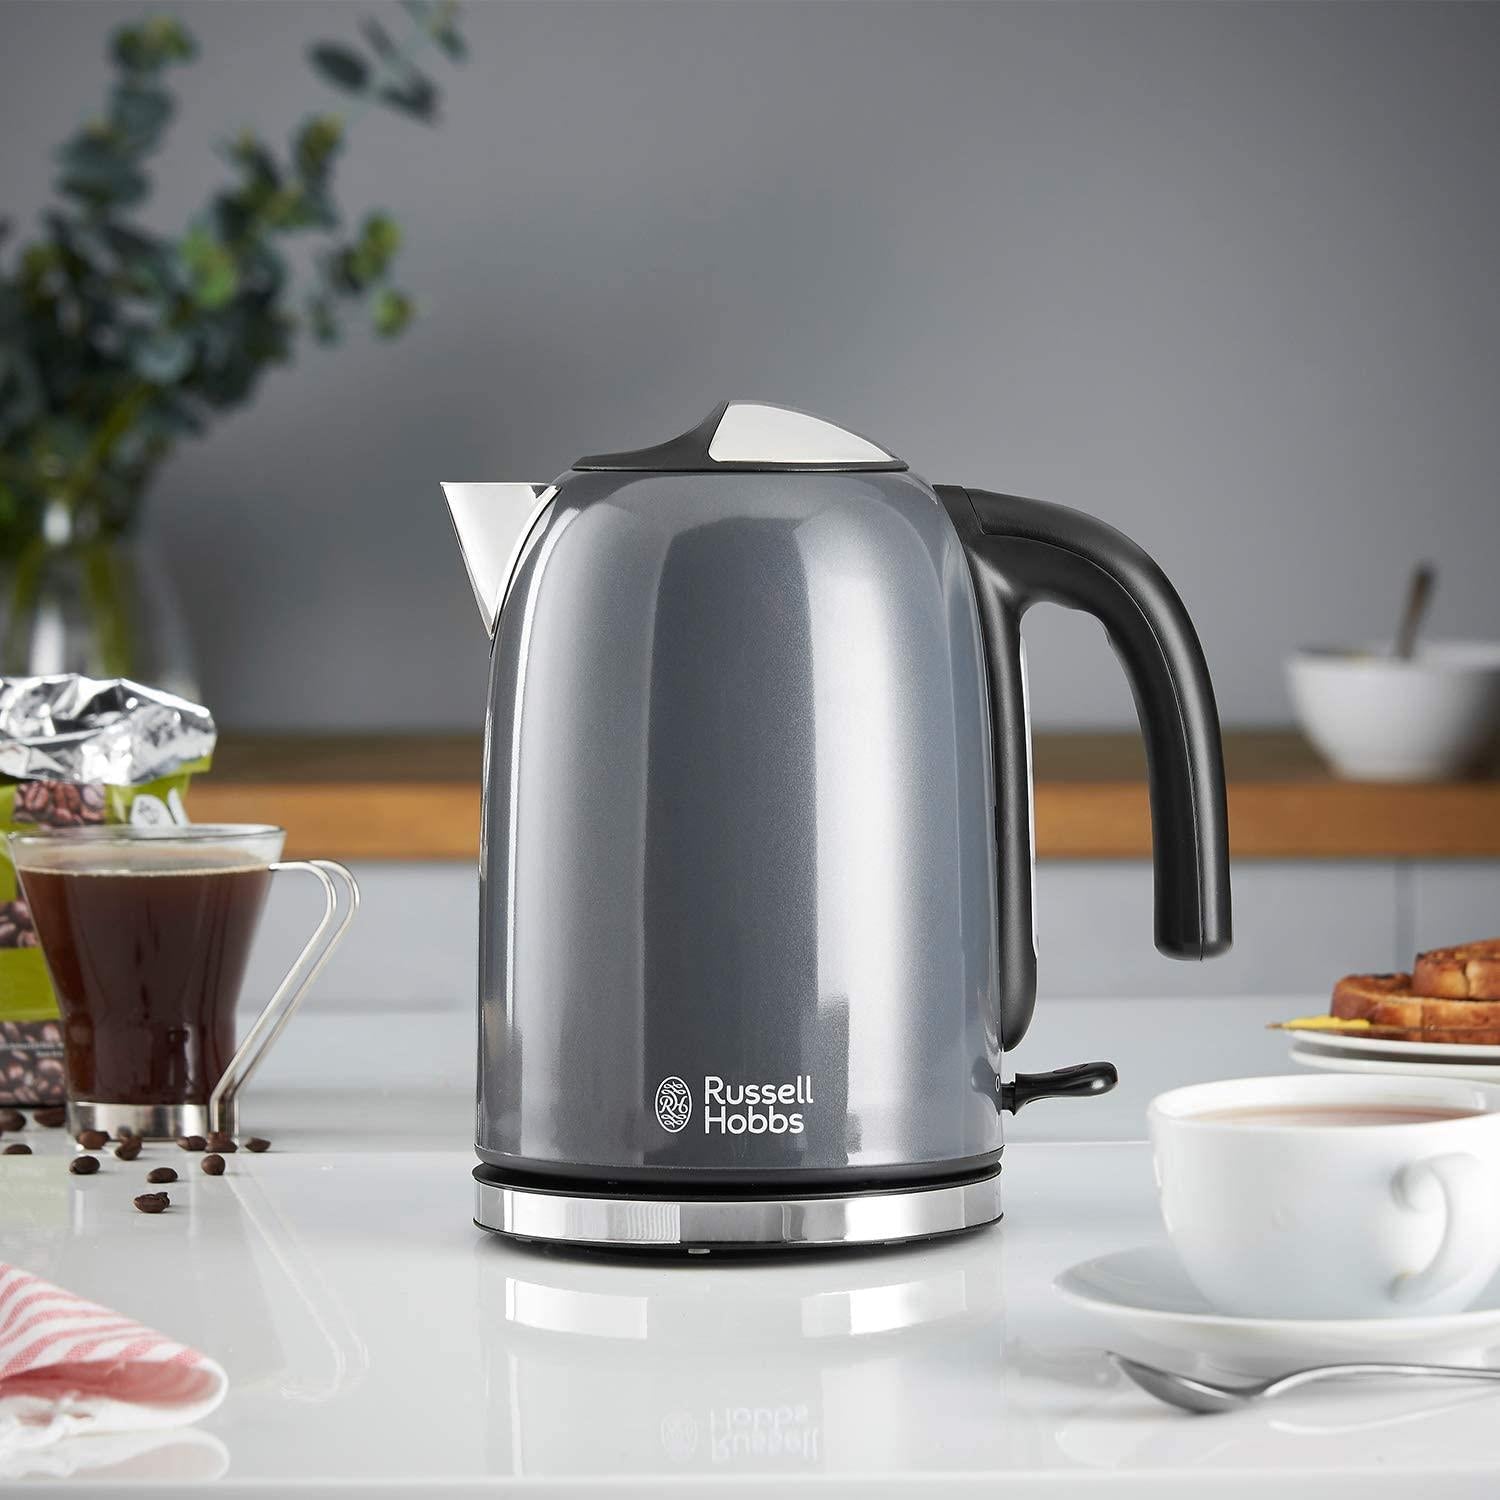 Russell Hobbs Electric Kettle Stainless Steel Jug 1.7 Litre Colours Plus Grey - 20414